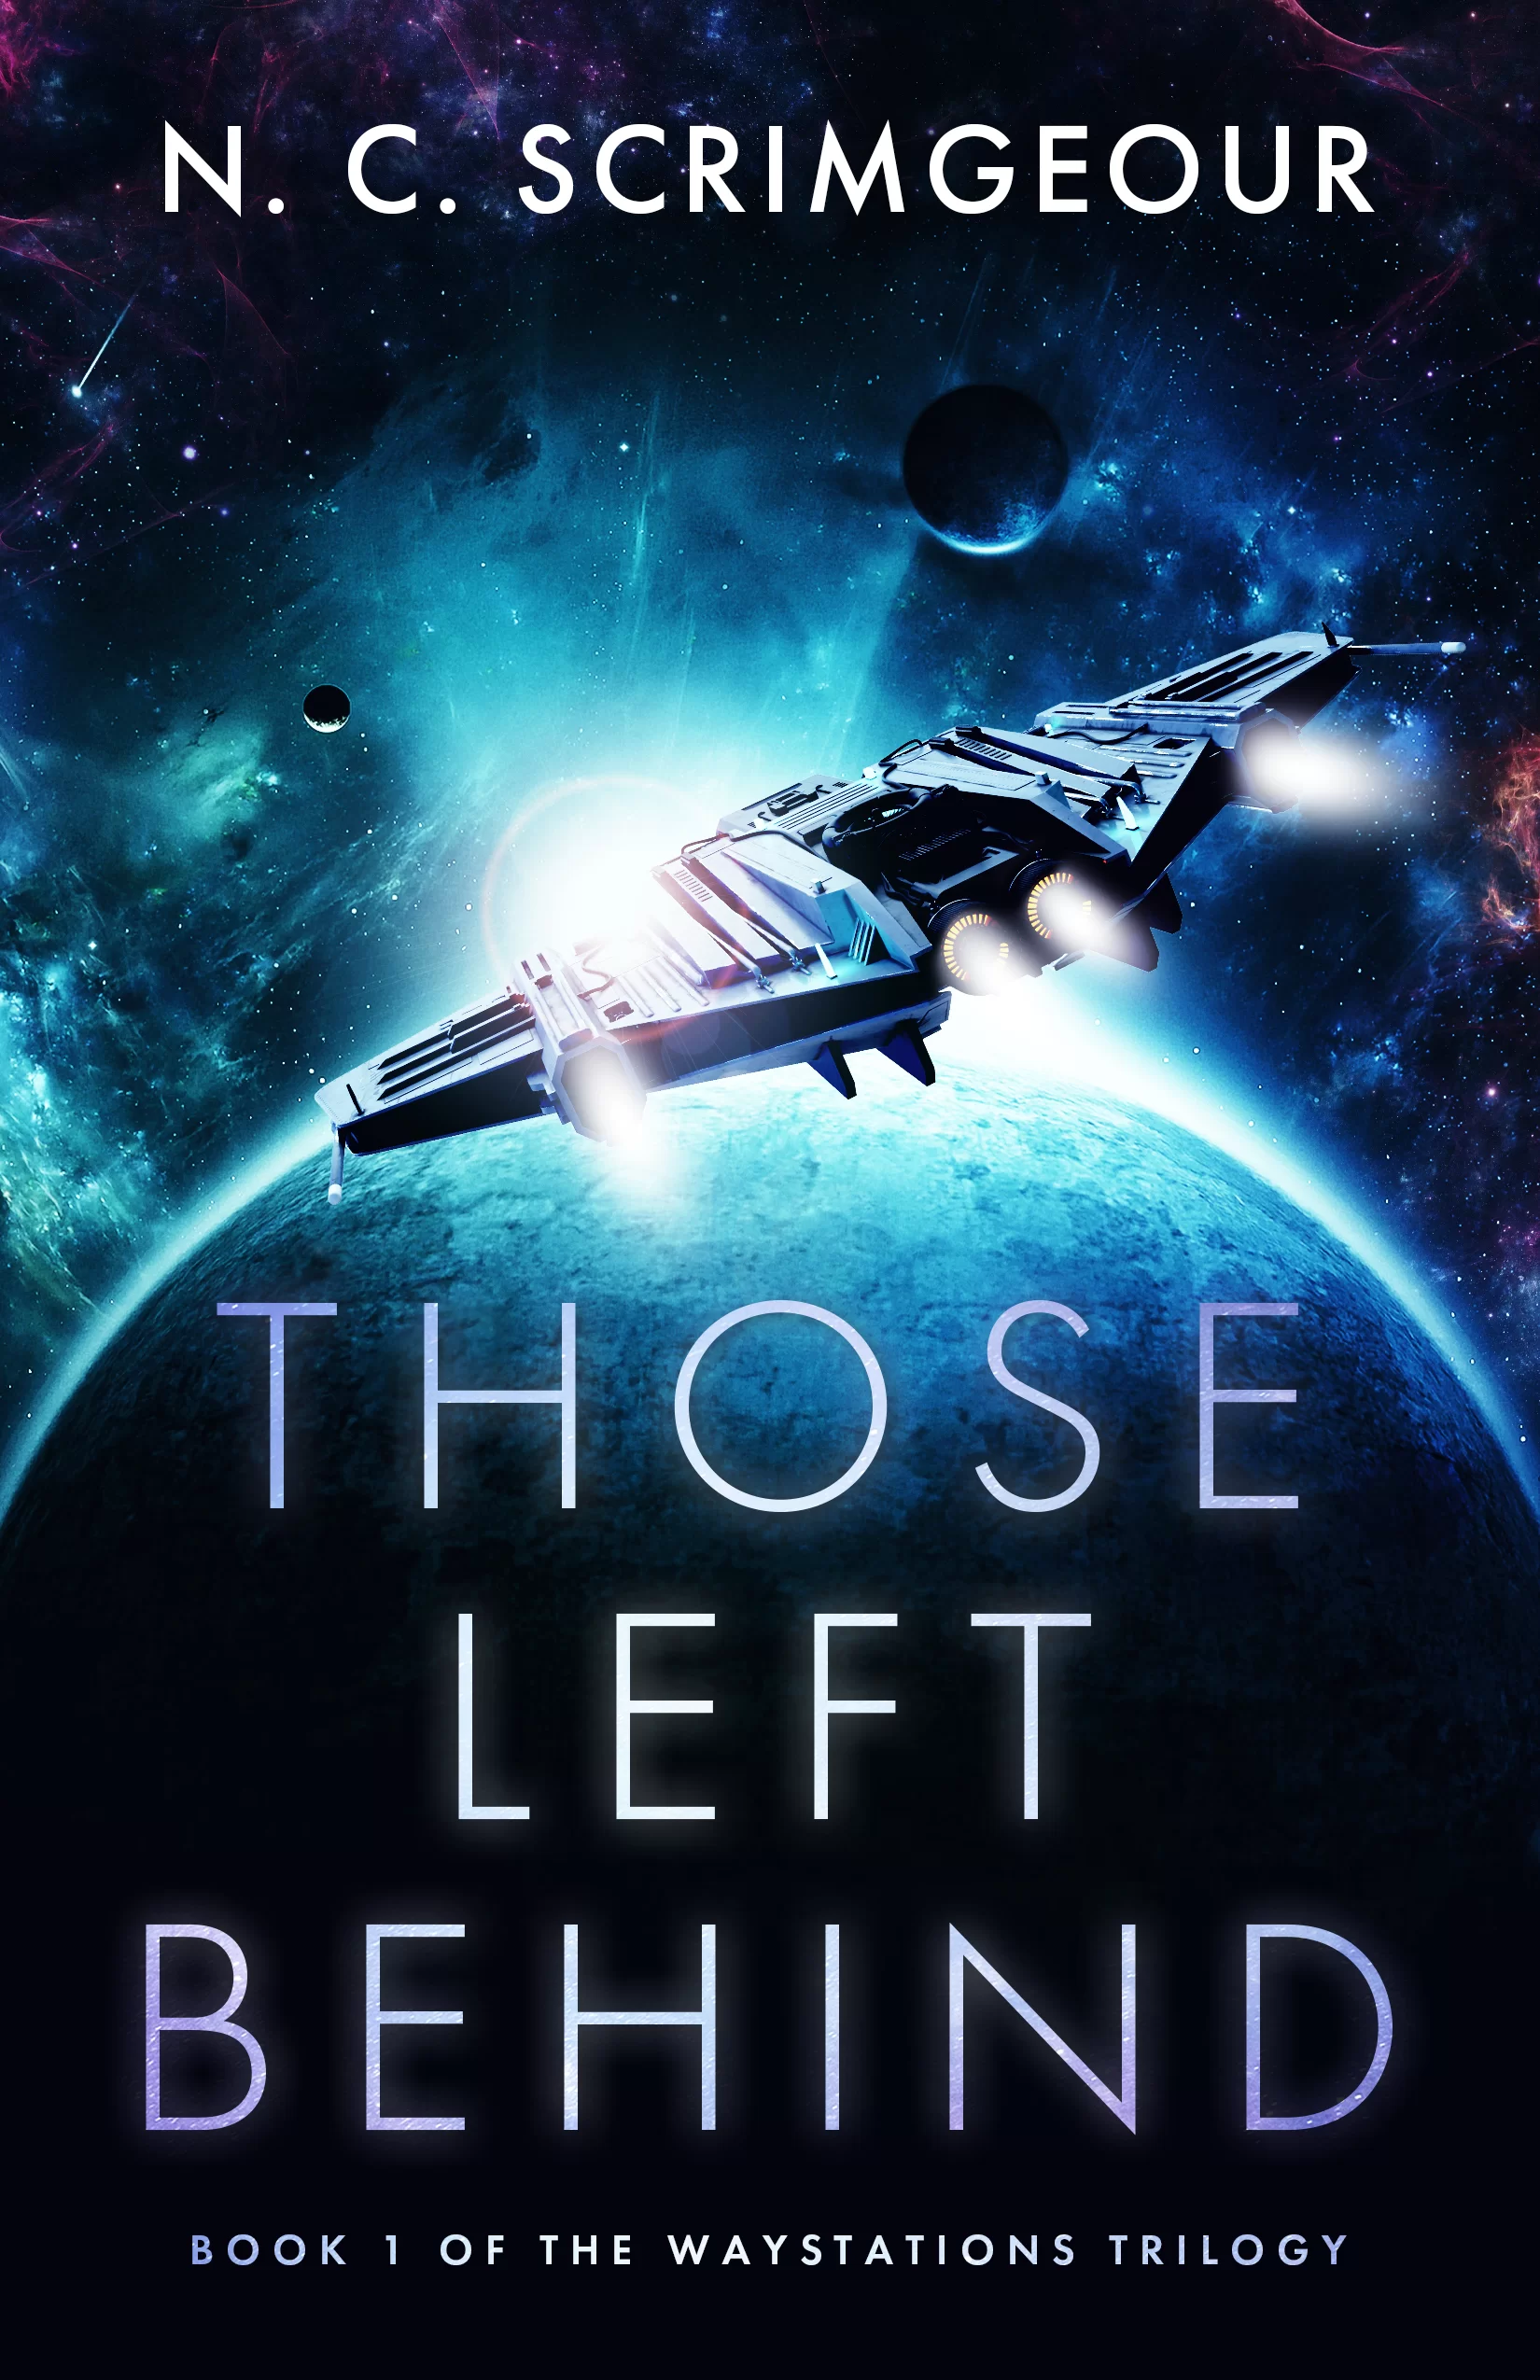 Cover of N.C. Scrimgeour's science fiction novel Those Left Behind, Book One of the Waystations Trilogy, which depicts a spaceship with jets firing and a sun's light forming a corona around a planet. The book was entered into the second Self-Published Science Fiction Contest (SPSFC)